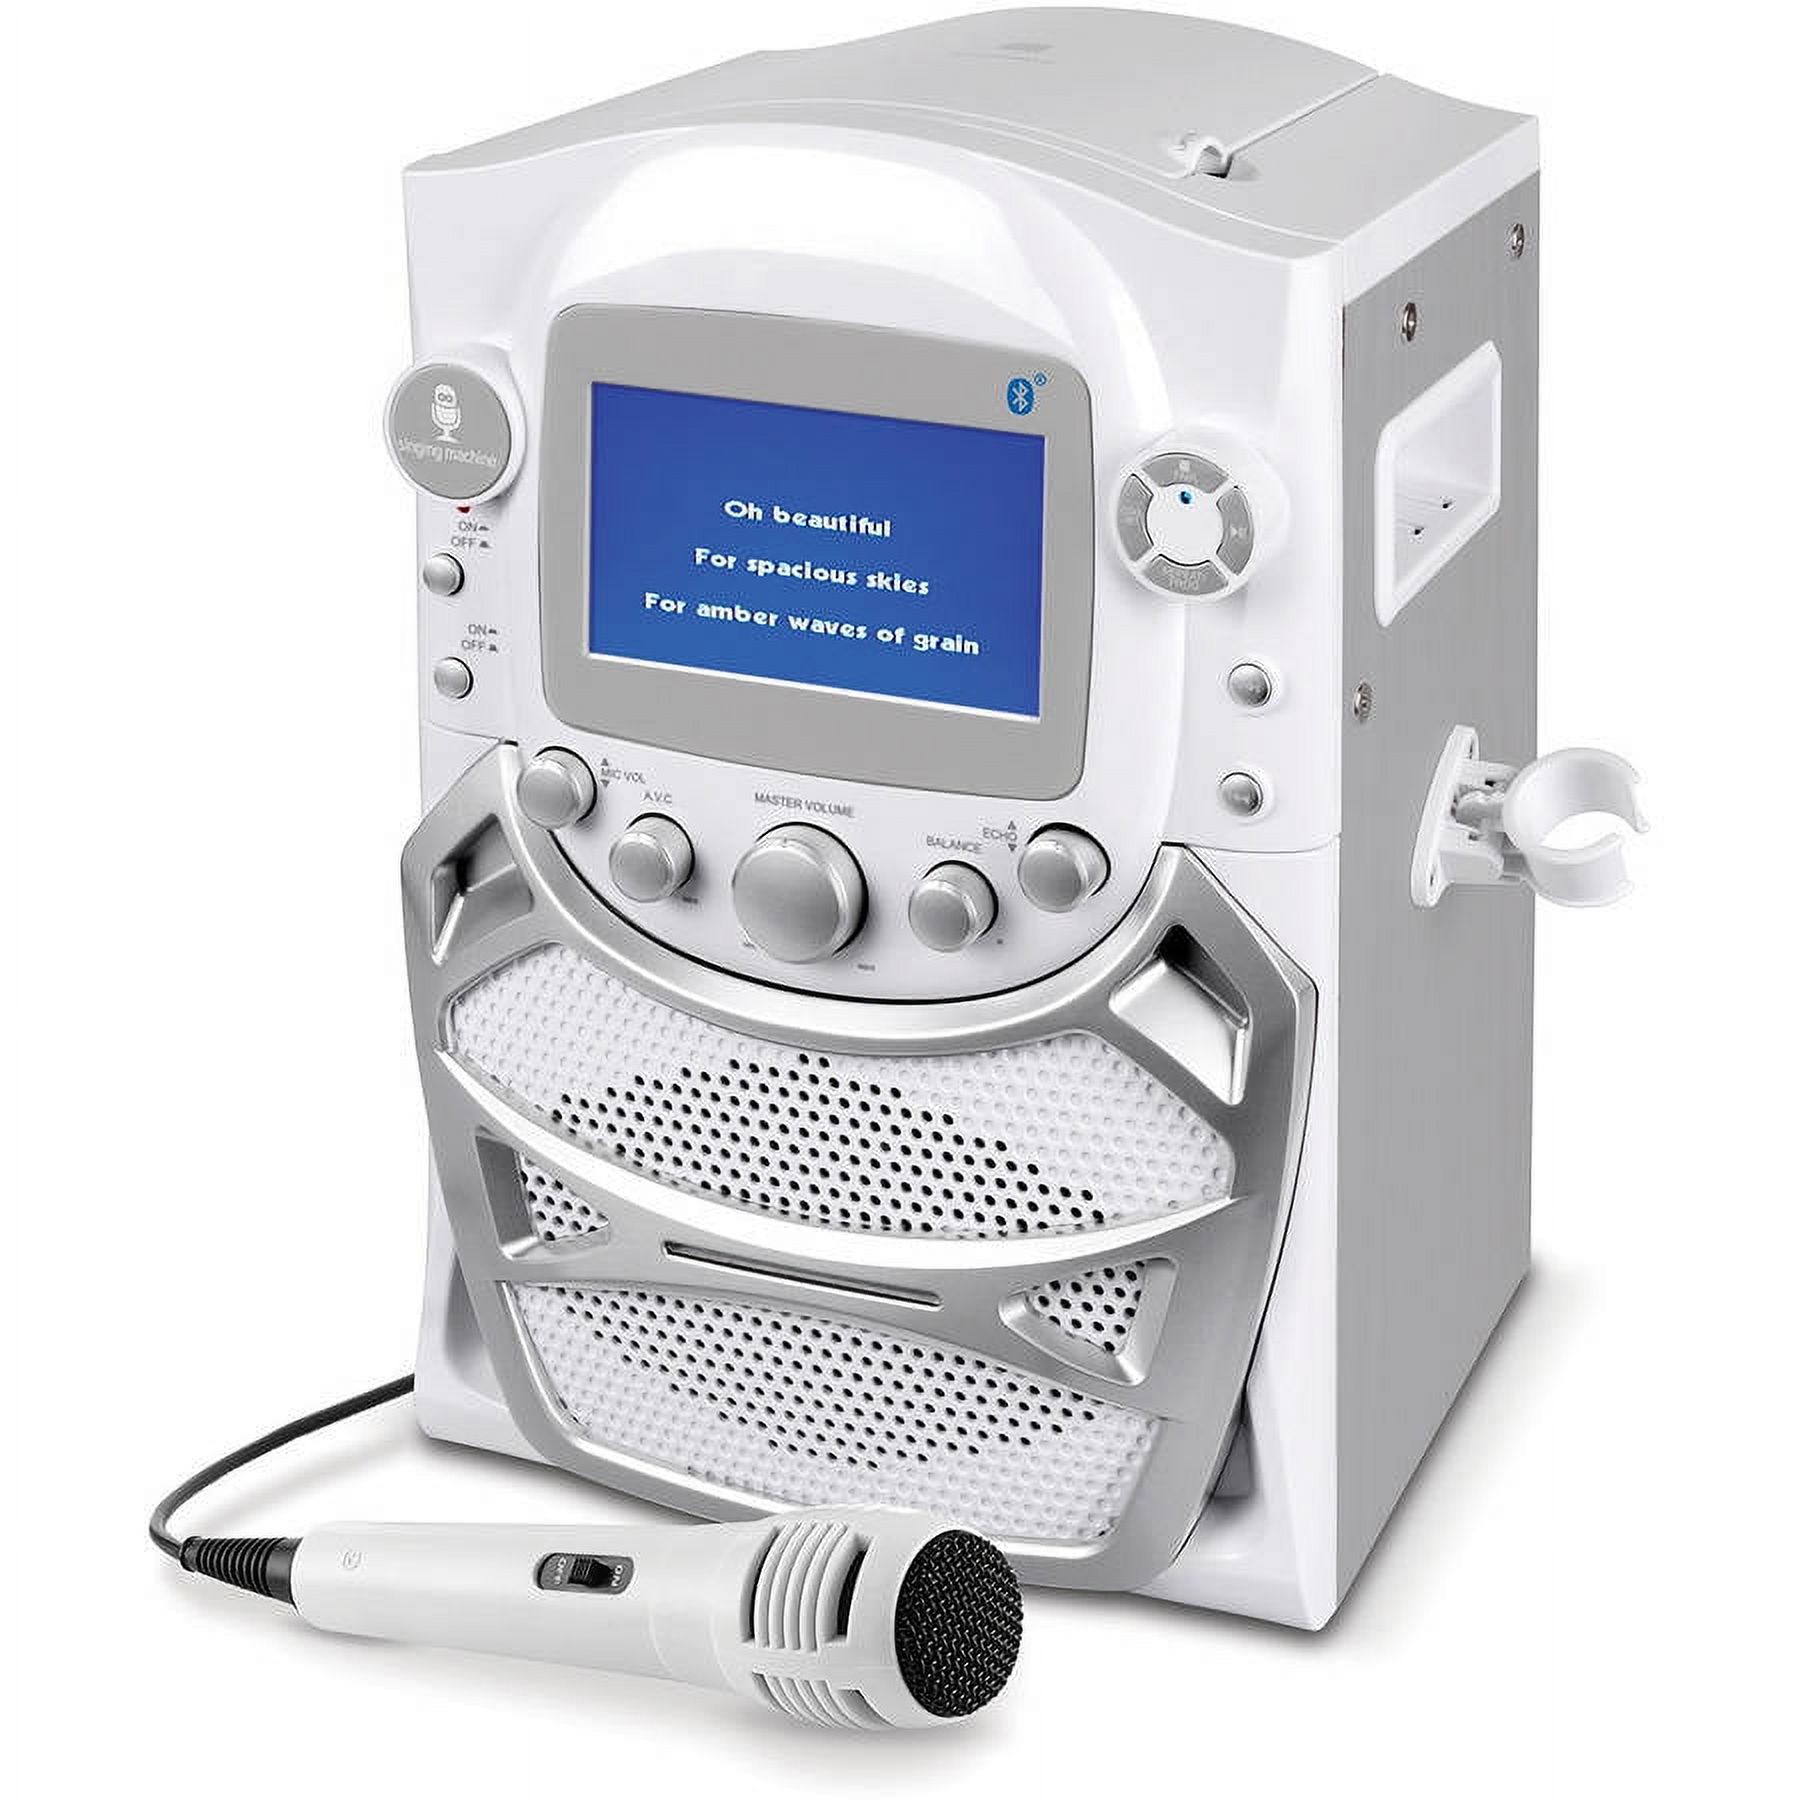 The Singing Machine CD+G Karaoke Bluetooth System with Built-In 5" Color TFT Monitor and Microphone - image 1 of 2